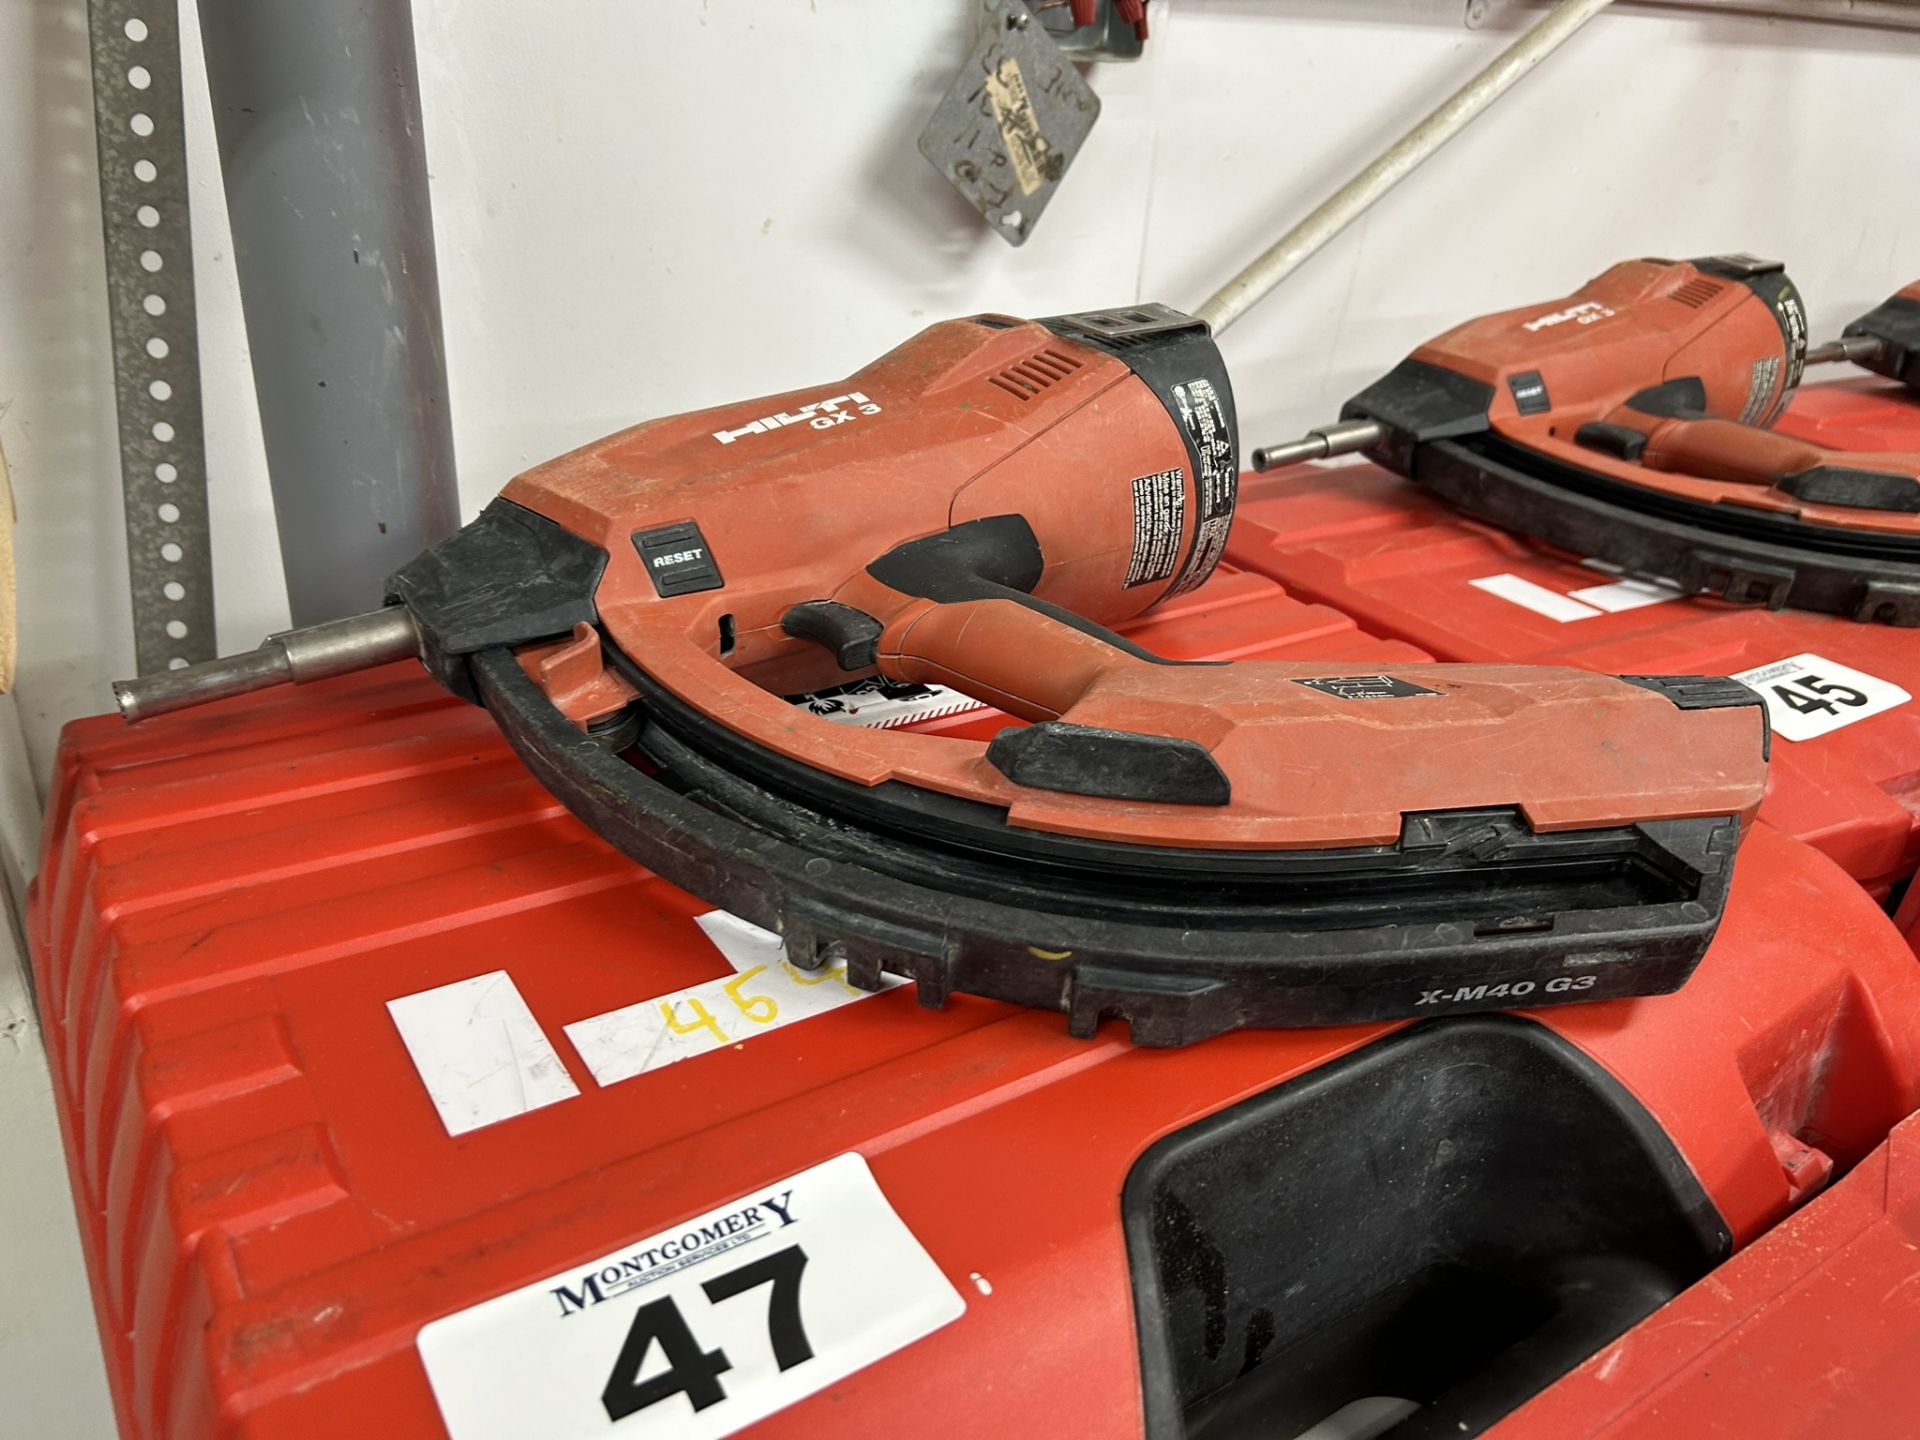 HILTI GX 3 GAS-ACTUATED FASTENING TOOL GAS NAILER WITH SINGLE POWER SOURCE FOR DRYWALL TRACK, - Image 2 of 6